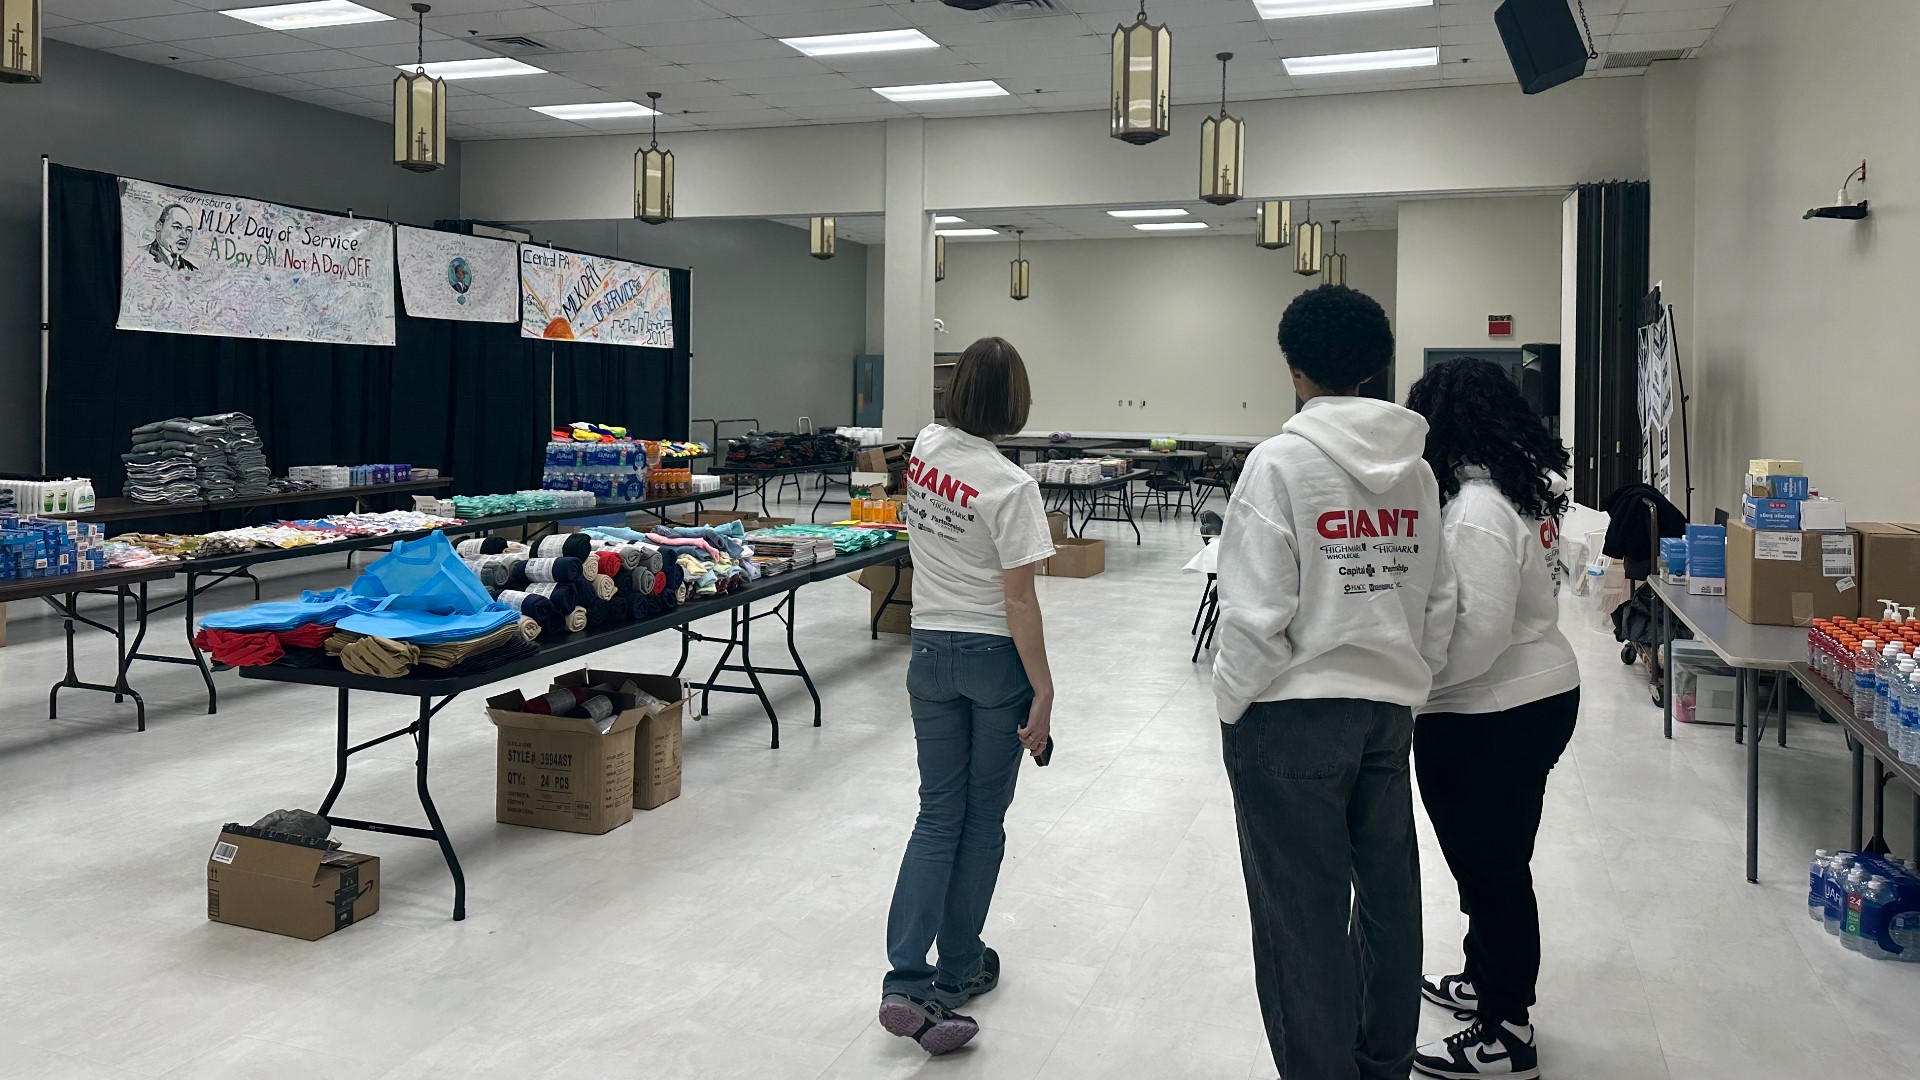 The MLK Day of Service invited community members to come out for multiple volunteer opportunities in the Harrisburg region.